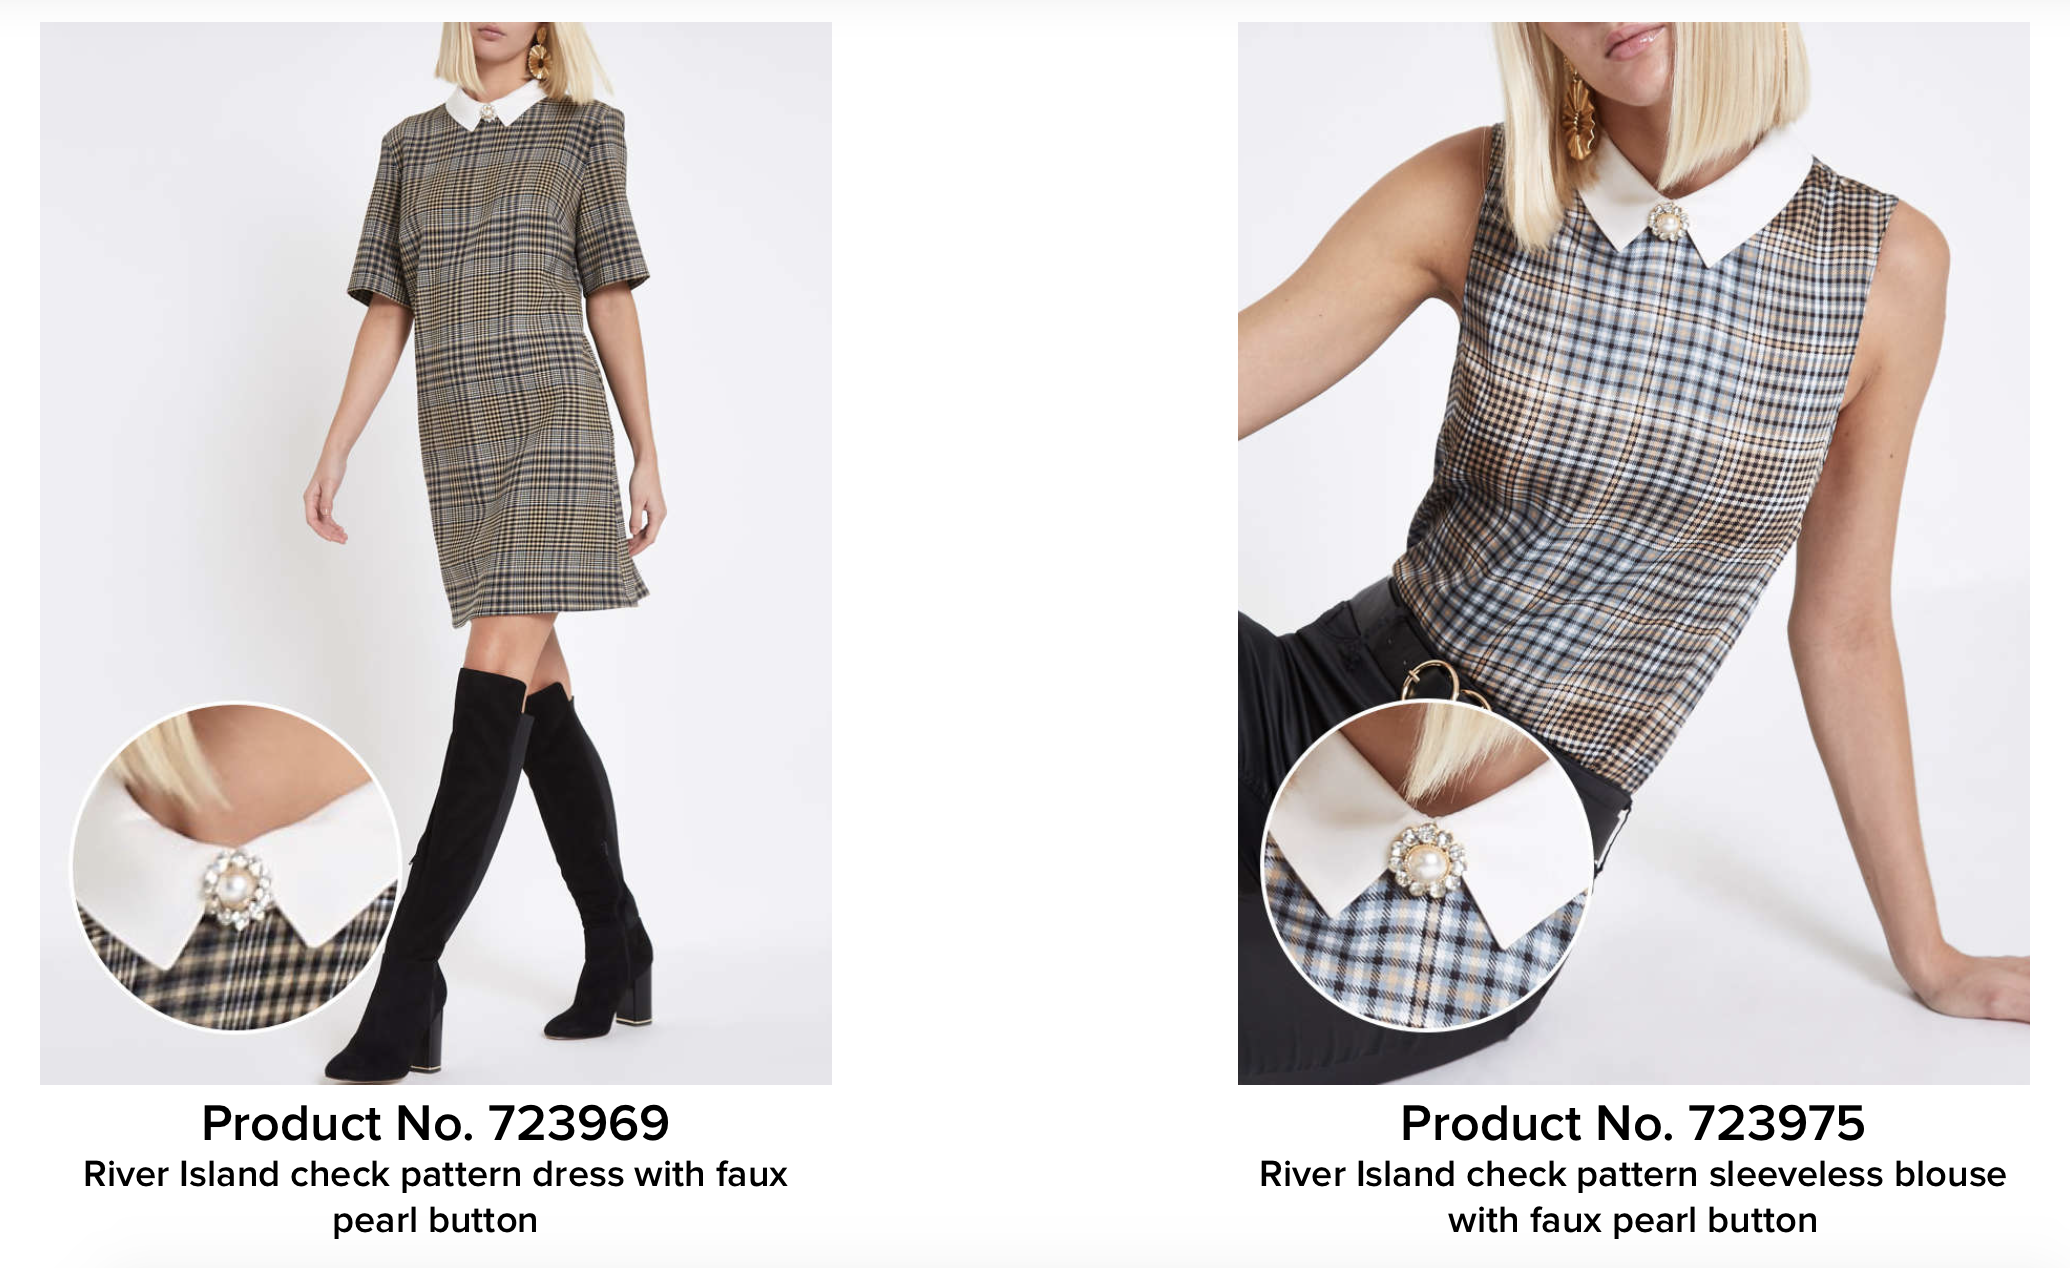 The above garments have been recalled by River Island over fears they contain harmful levels of cadmium (River Island)